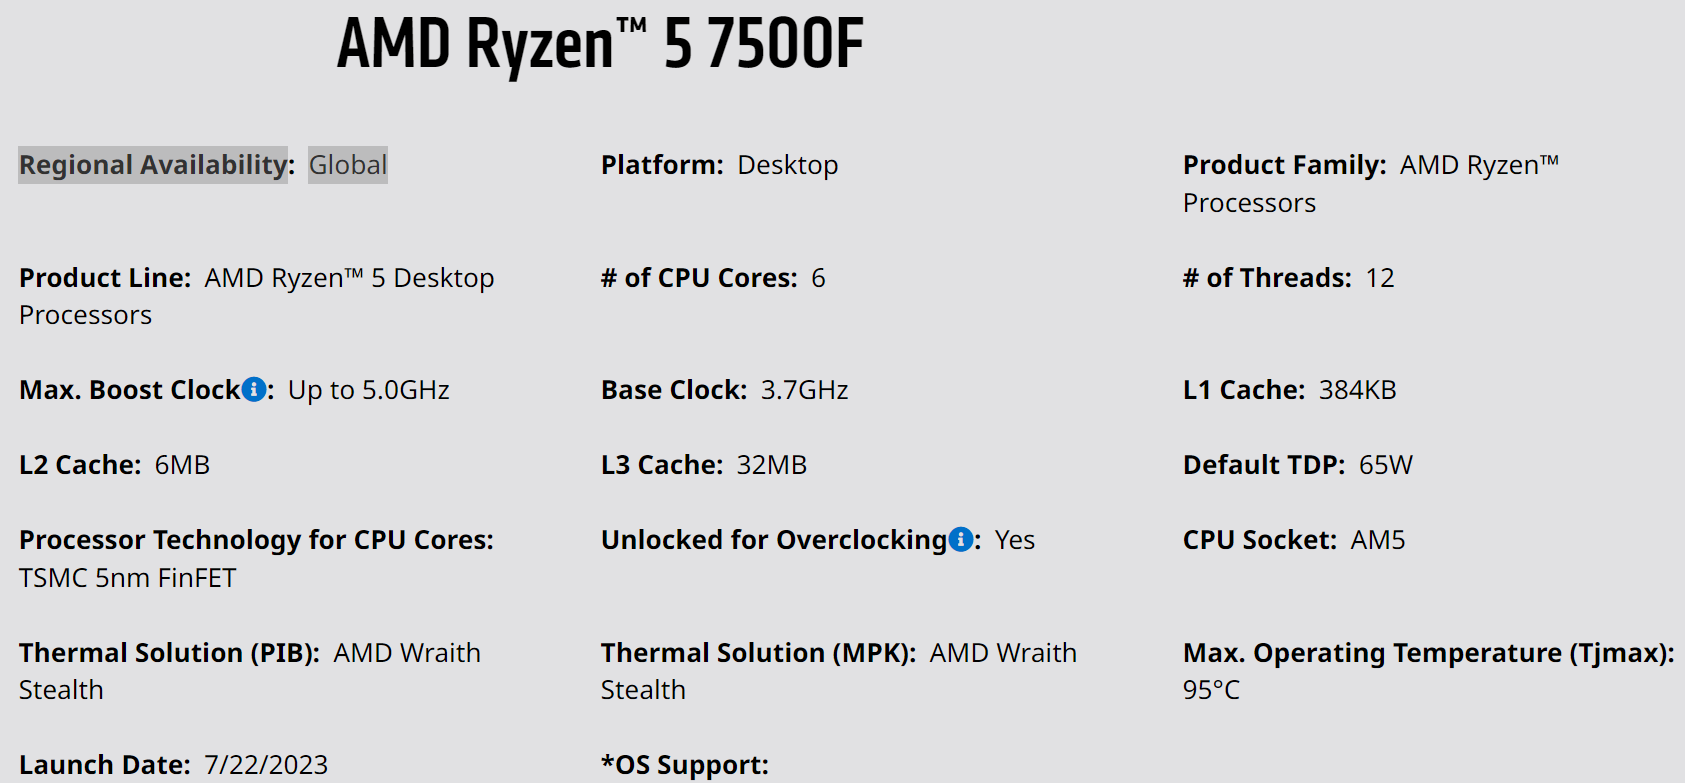 AMD Ryzen 5 7500F to launch this week, the first AM5 CPU without